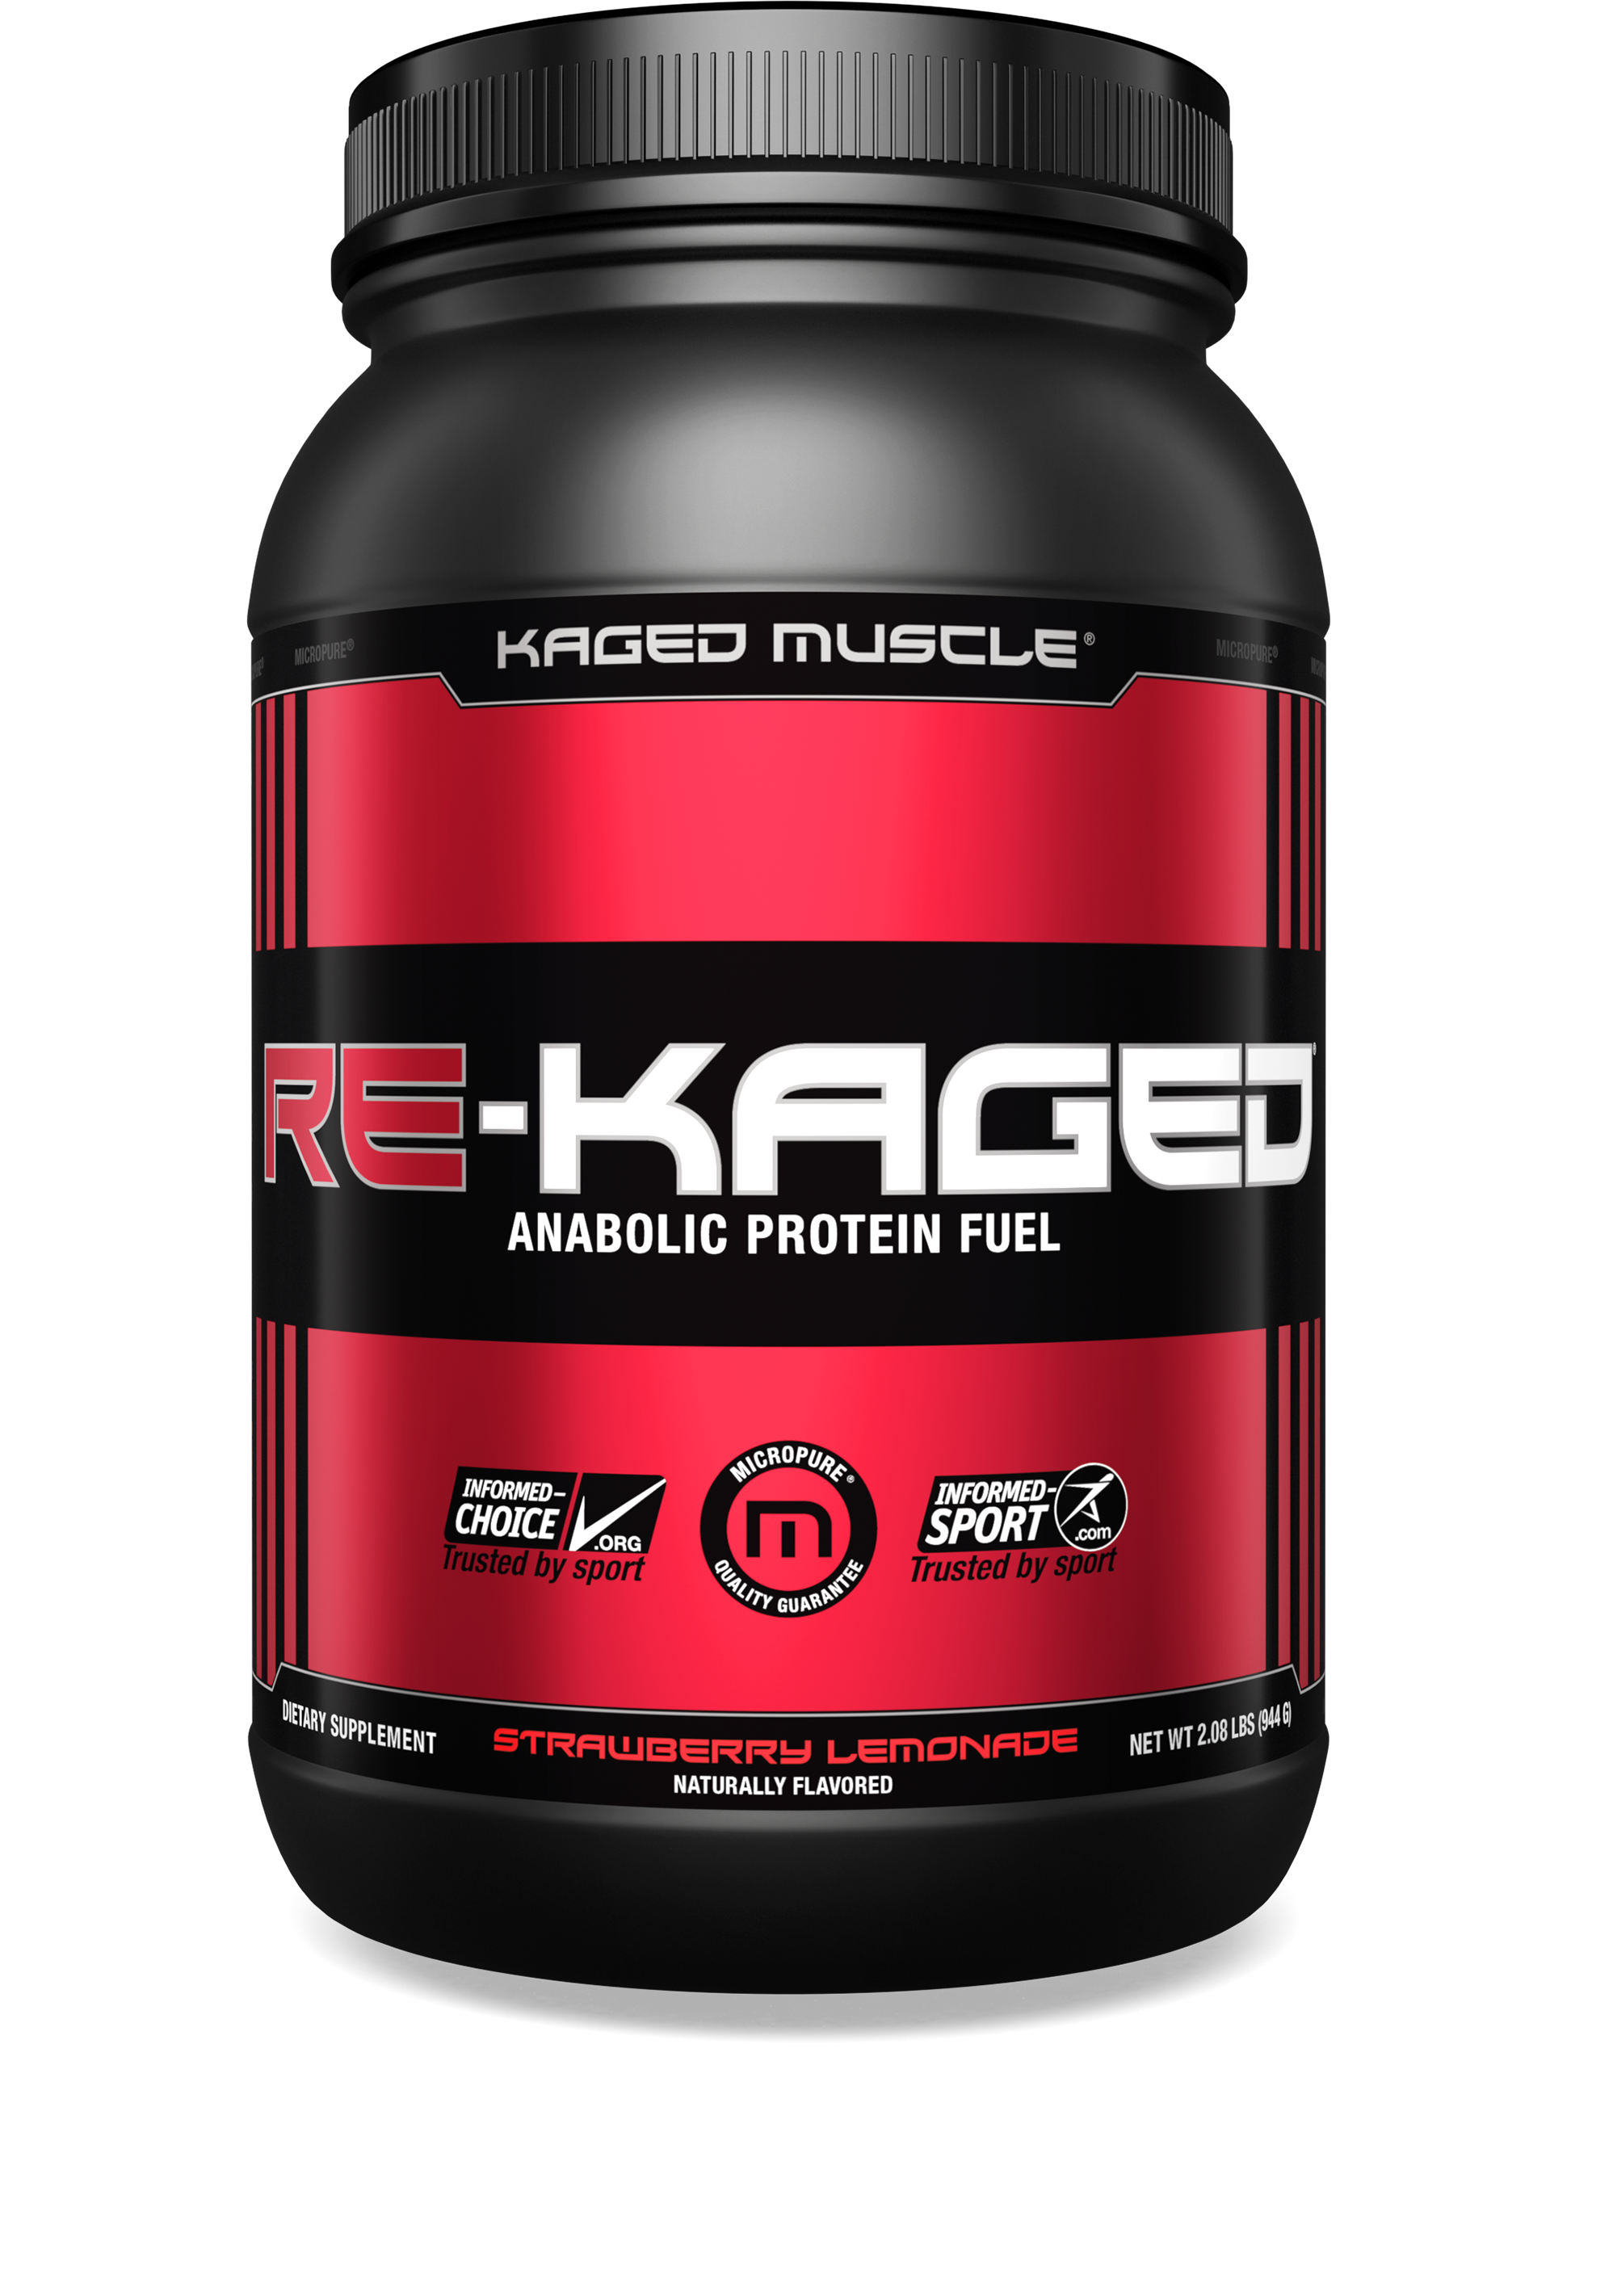 Best Kaged muscle post workout for Fat Body